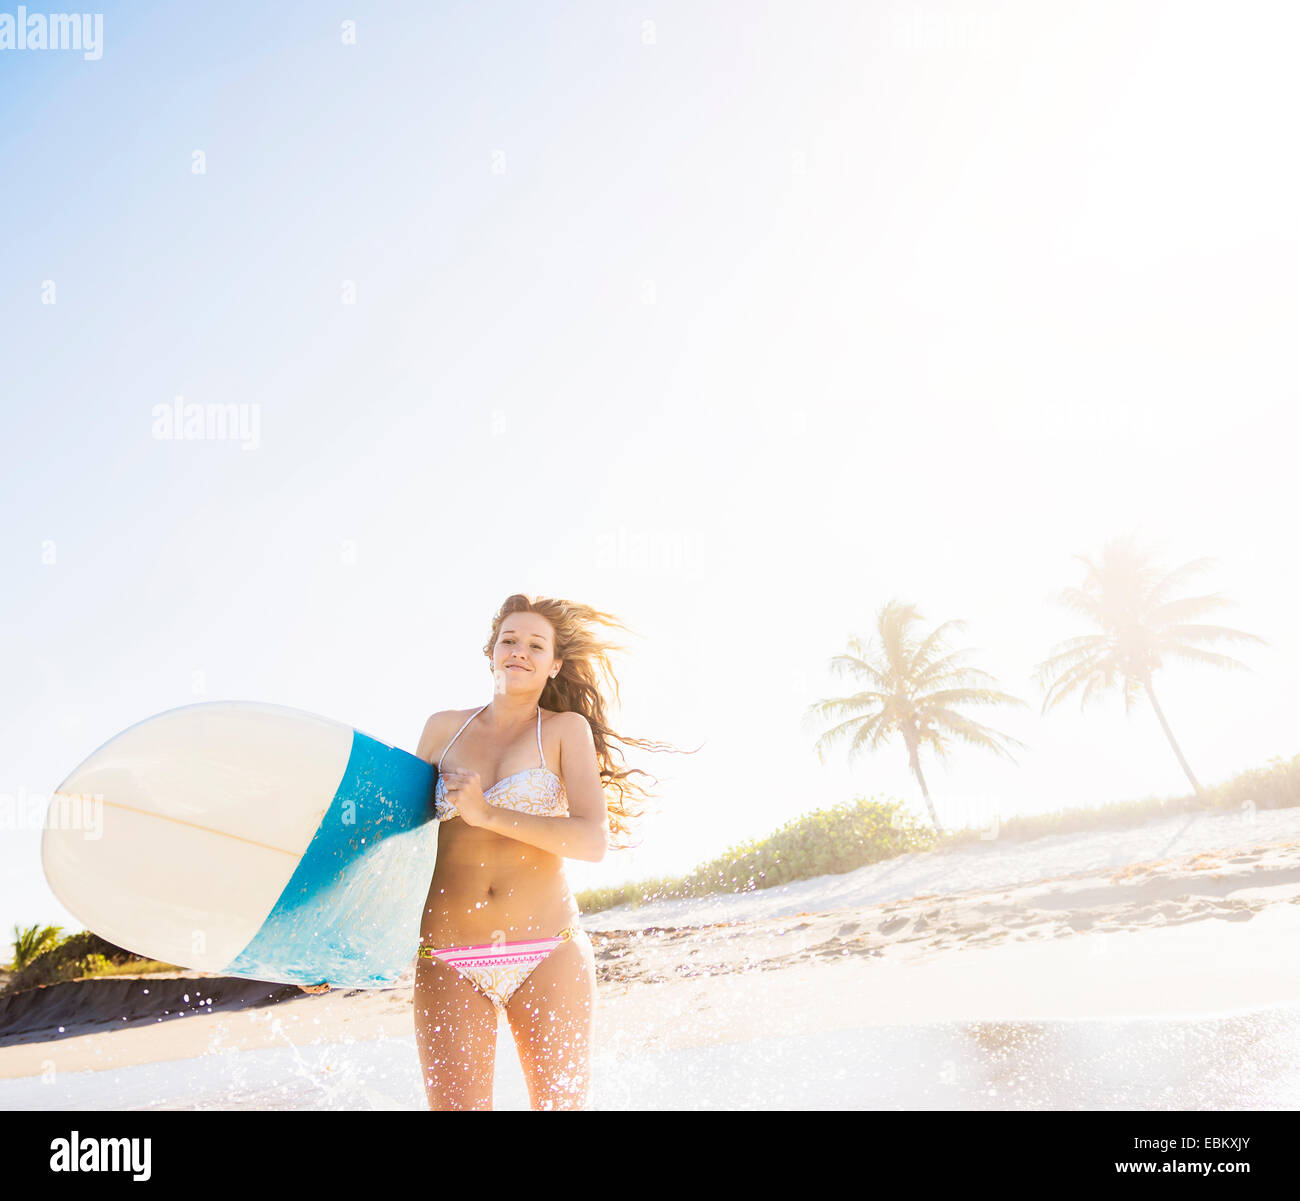 USA, Floride, Jupiter, young woman running in surf surfboard comptable Banque D'Images